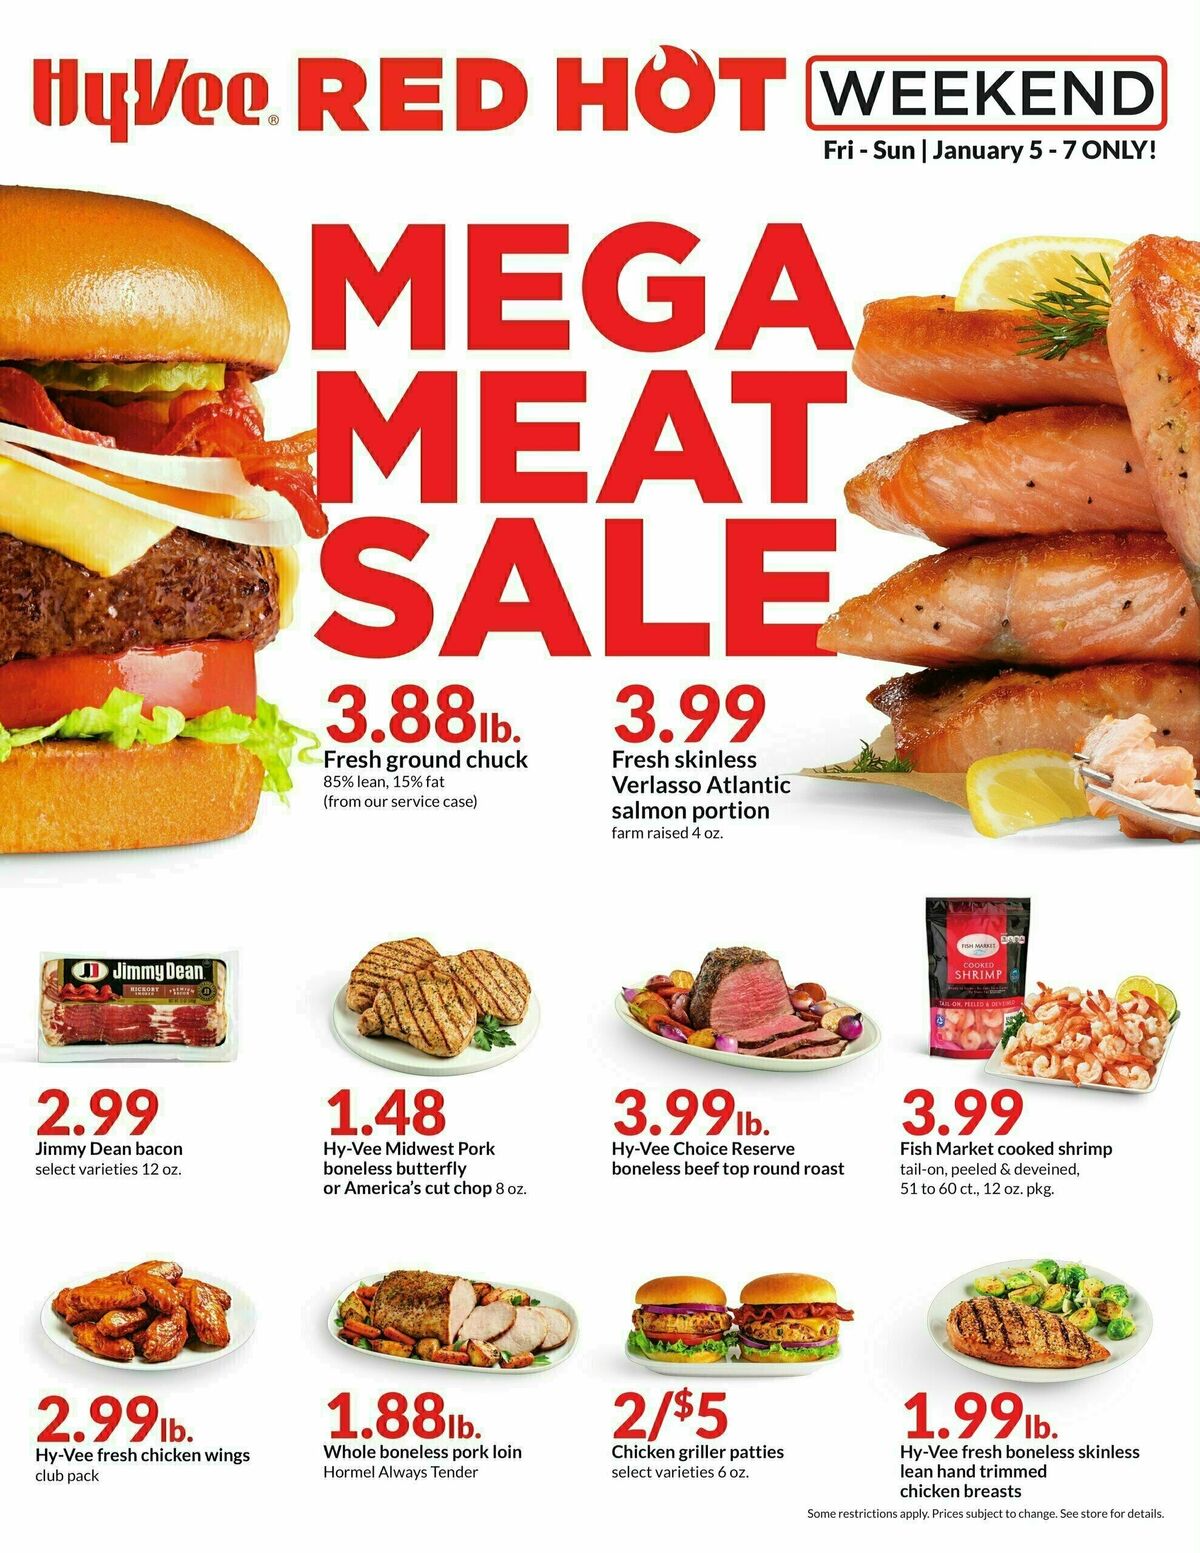 Hy-Vee Mega Meat Sale Weekly Ad from January 5